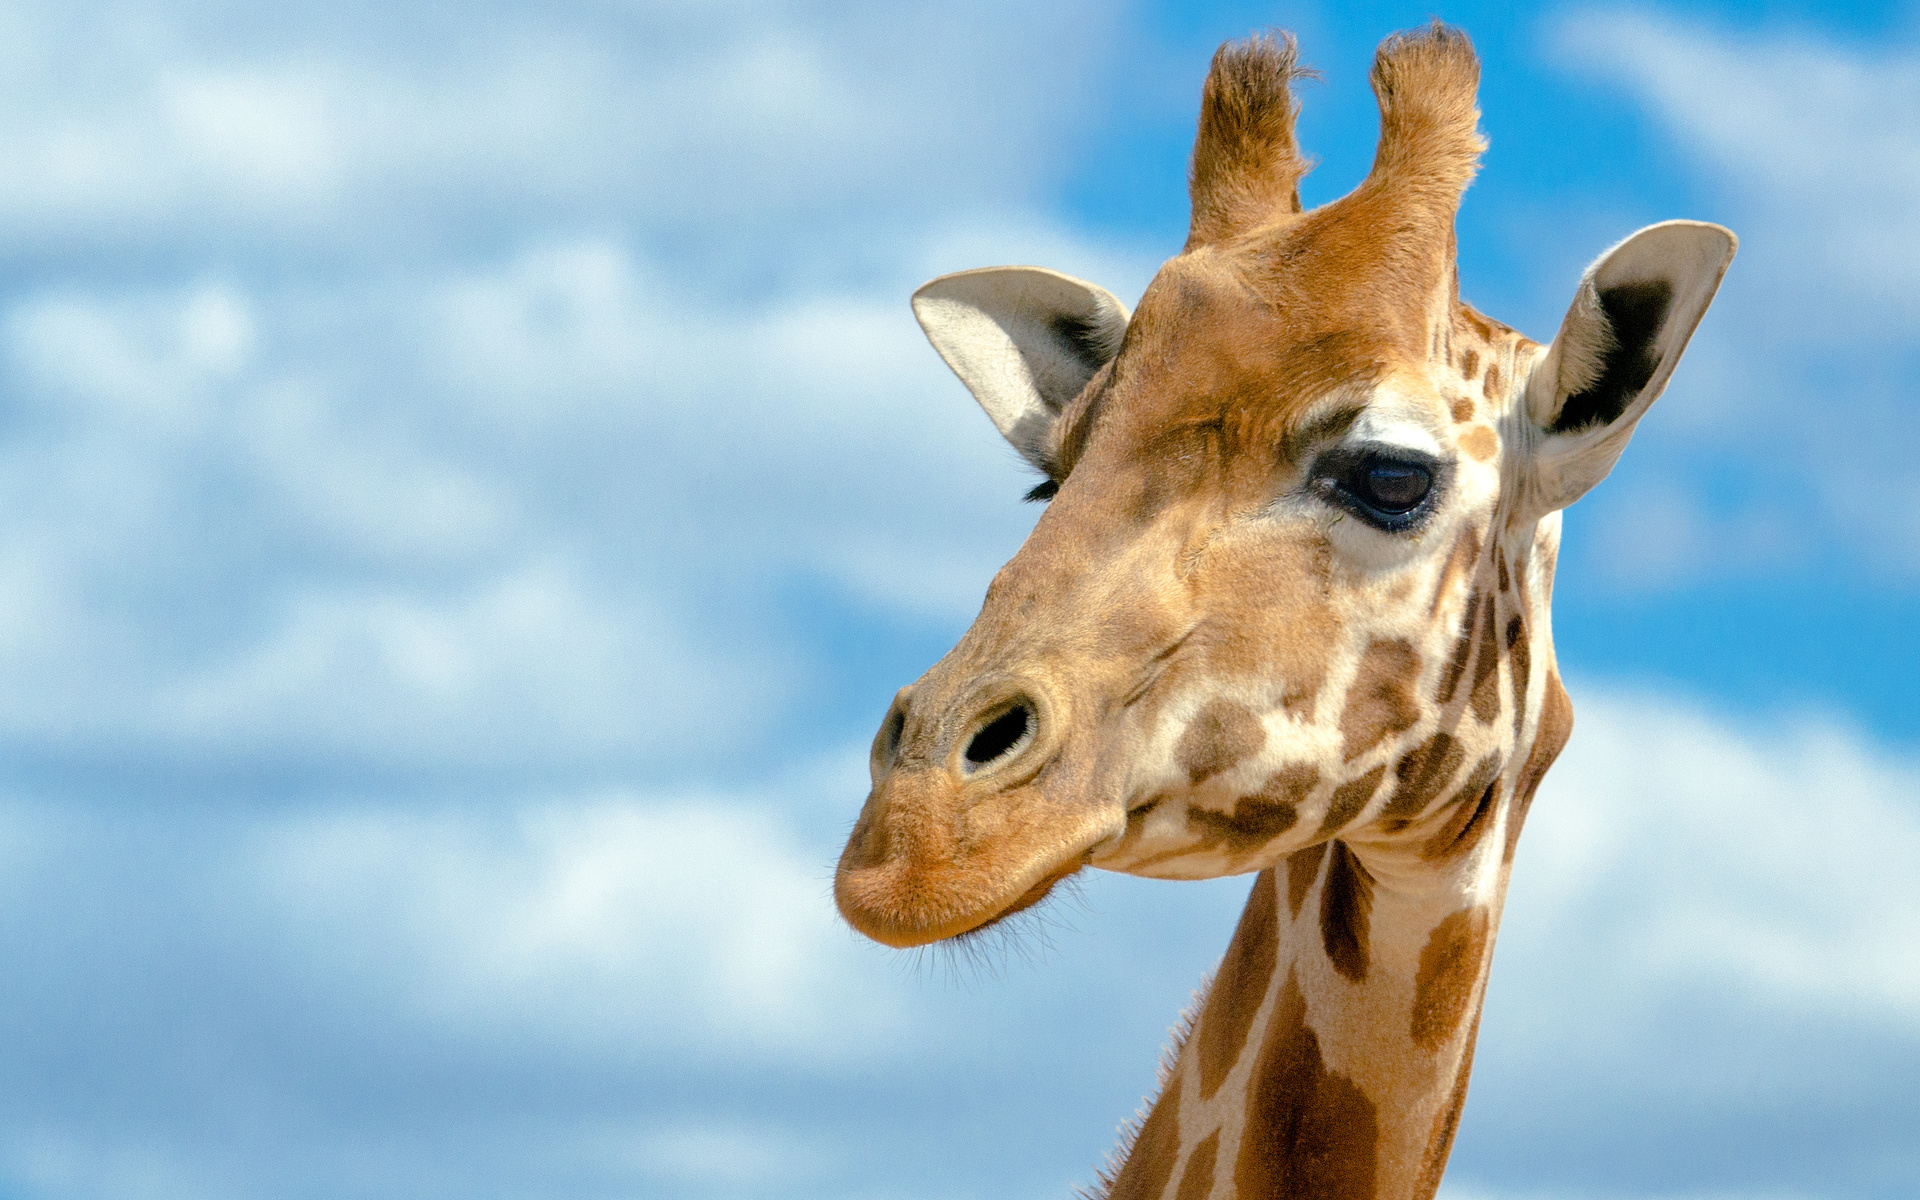 Giraffes Image HD Wallpaper And Background Photos